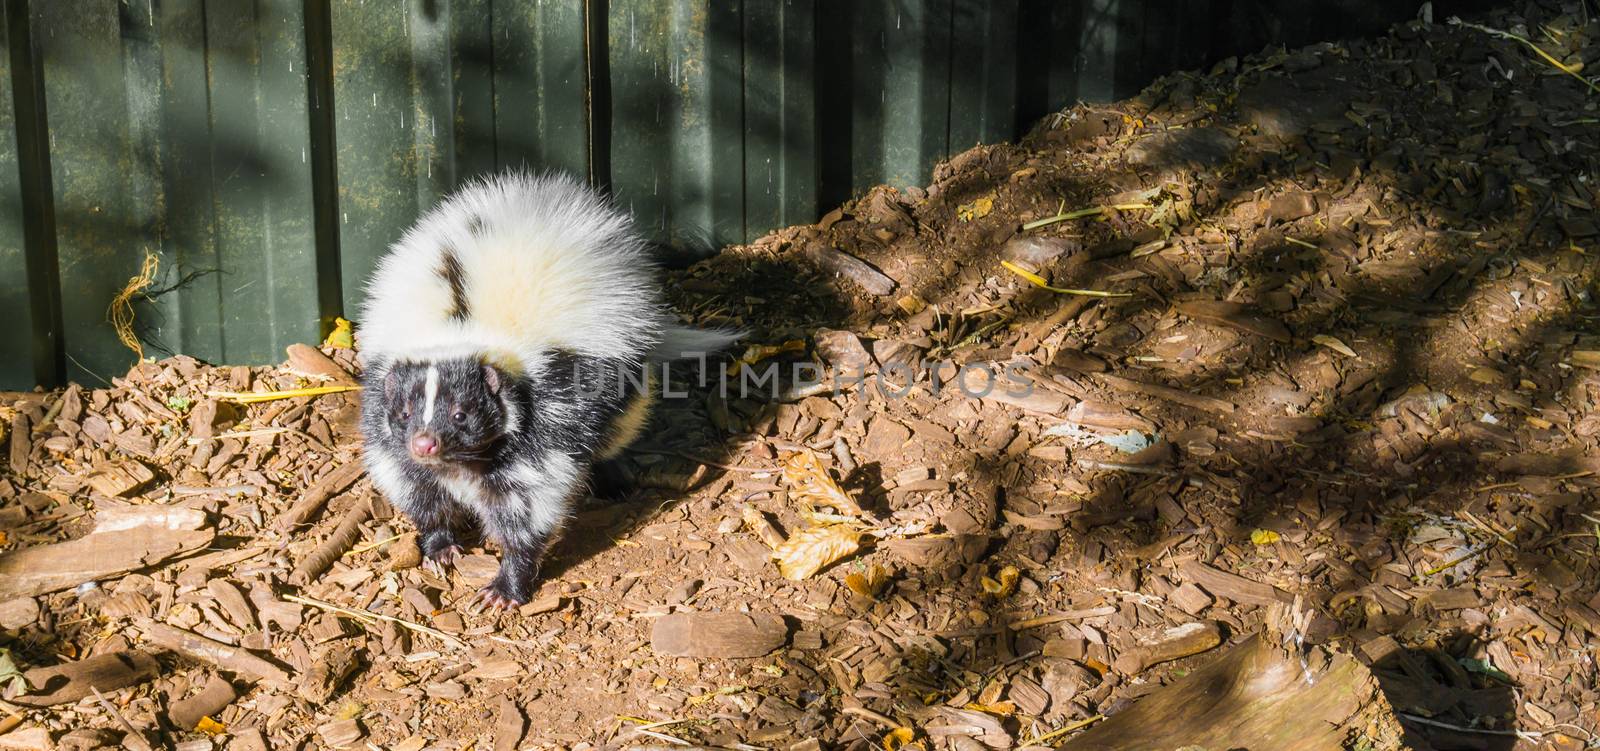 white and black common striped skunk standing and sniffing toward the camera a wild smelly animal from canada by charlottebleijenberg